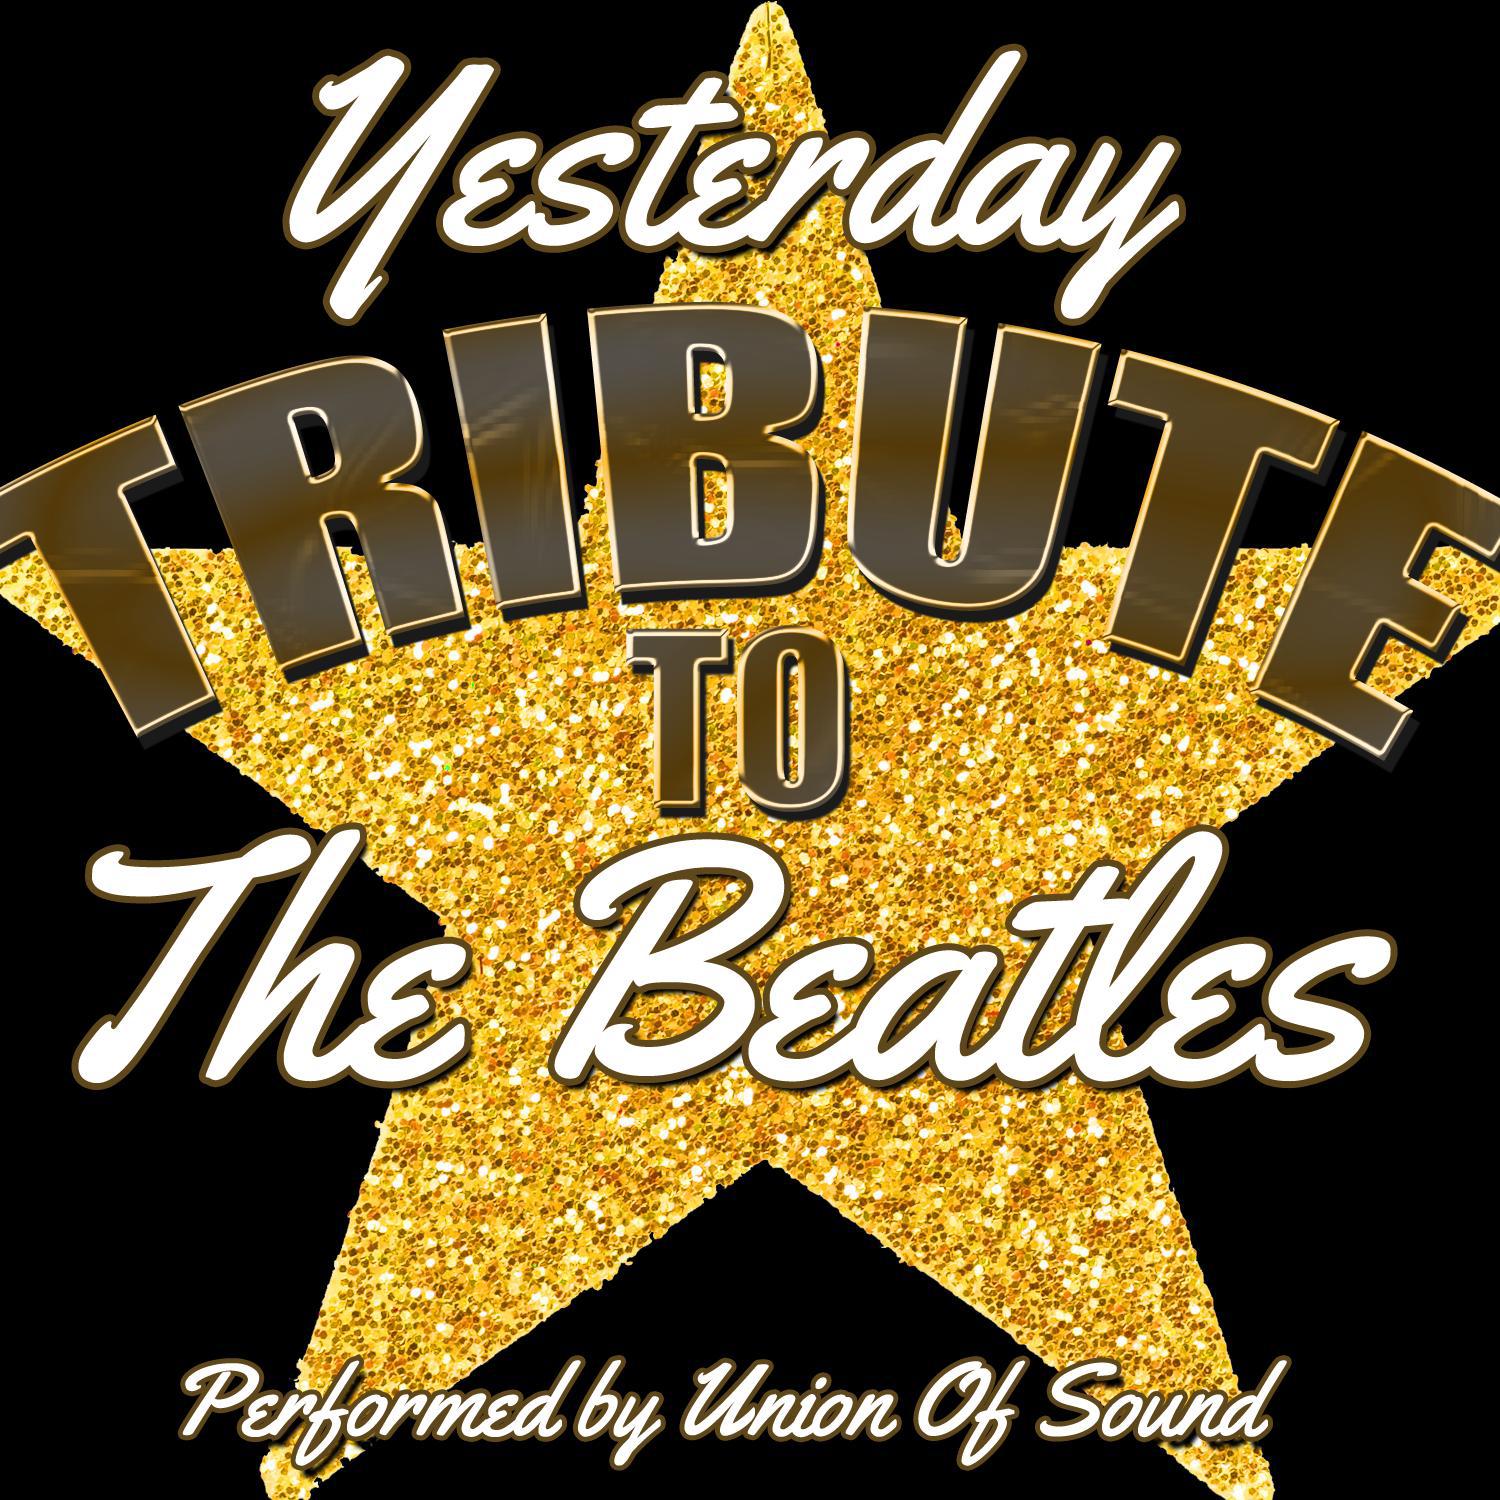 Yesterday: Tribute to the Beatles